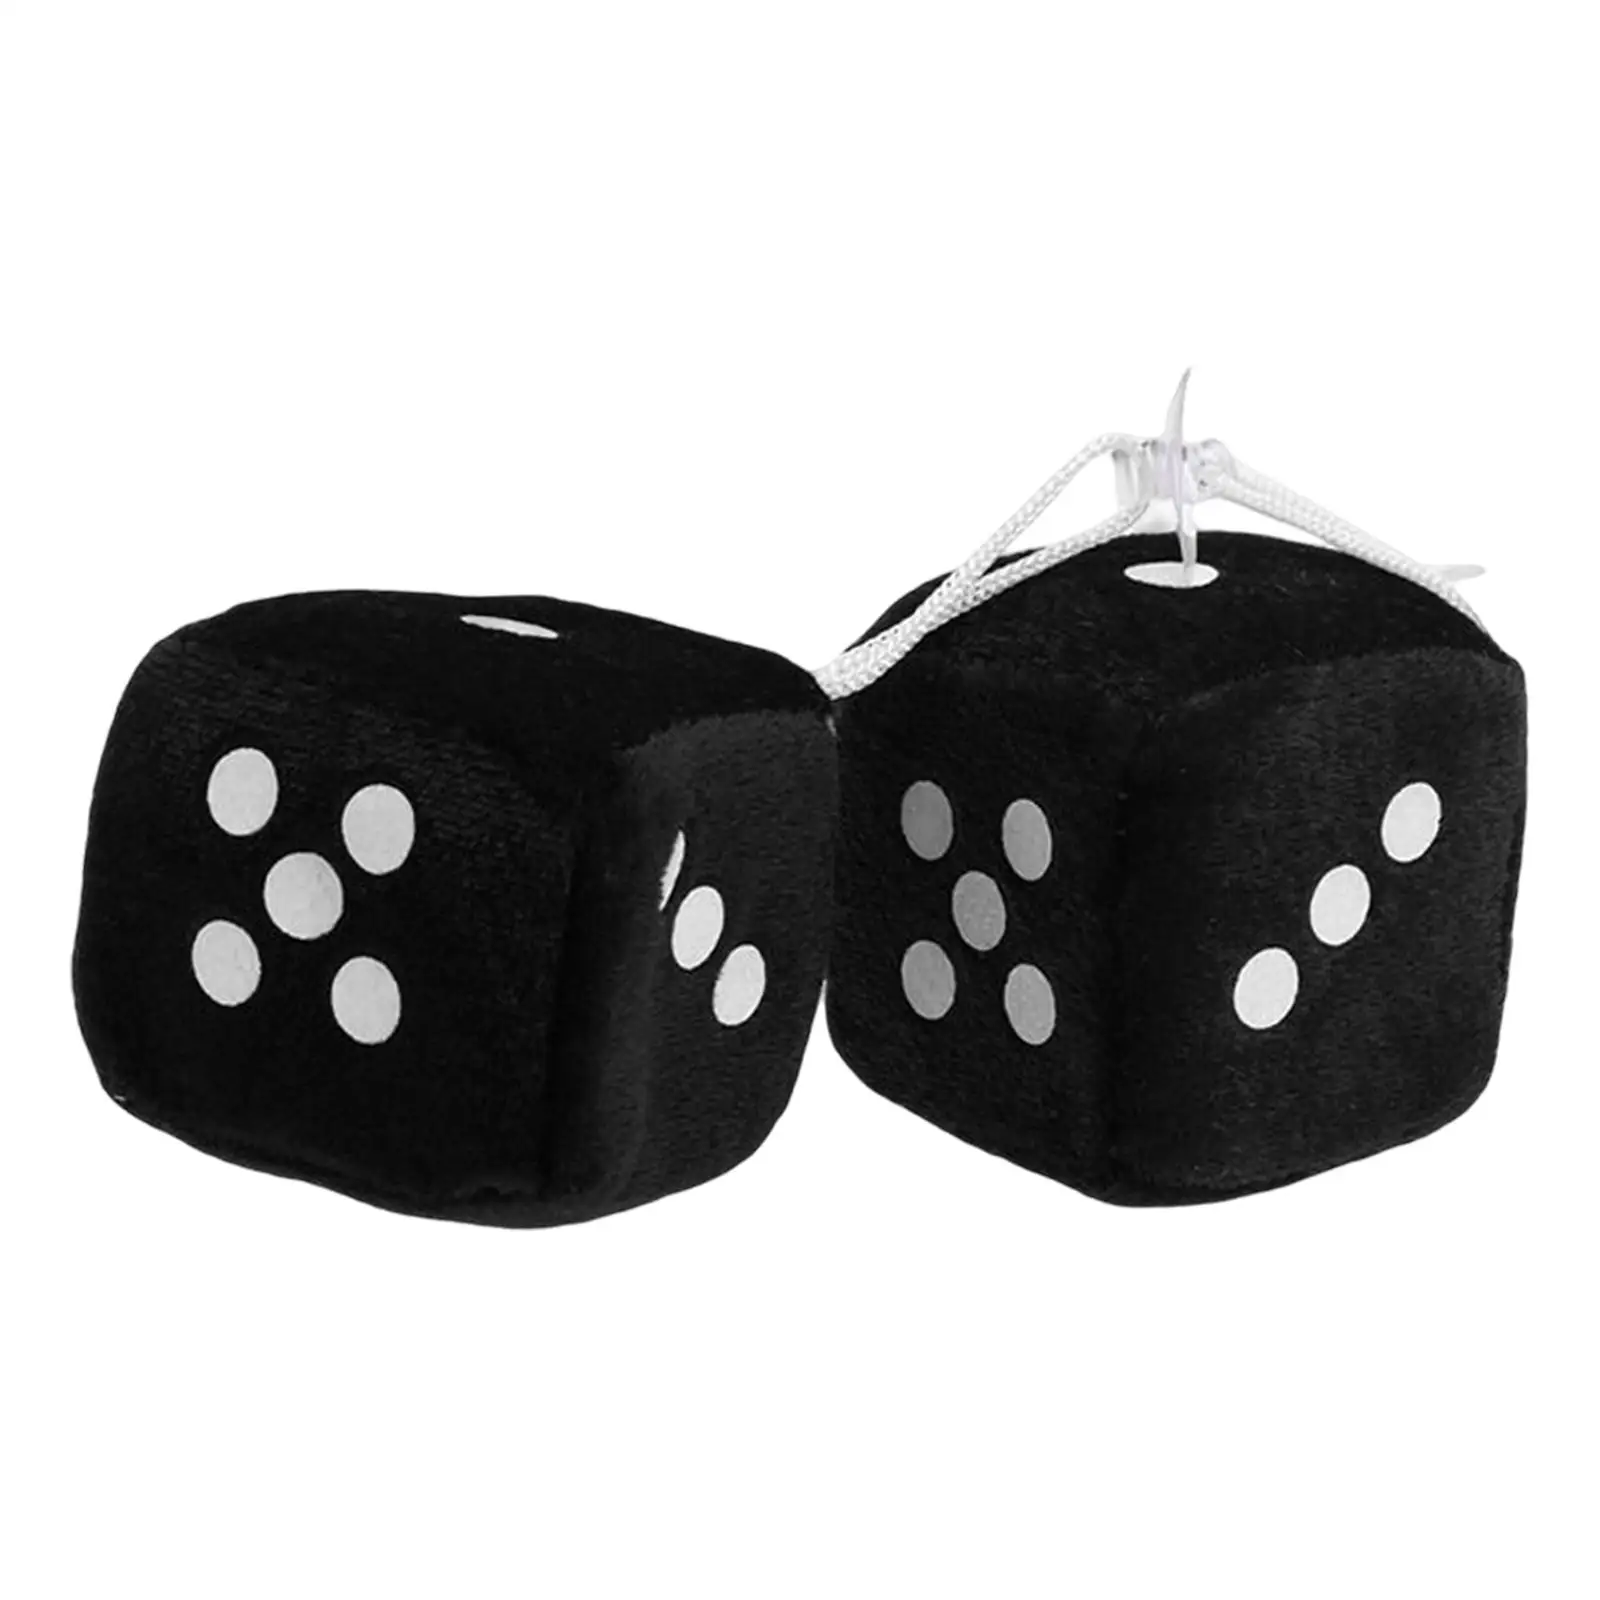 2 Pieces Retro Car Fuzzy Dice with Dots Car Styling Home Office Rear View Mirror Hanger Plush Decor Release Pressure Ornament